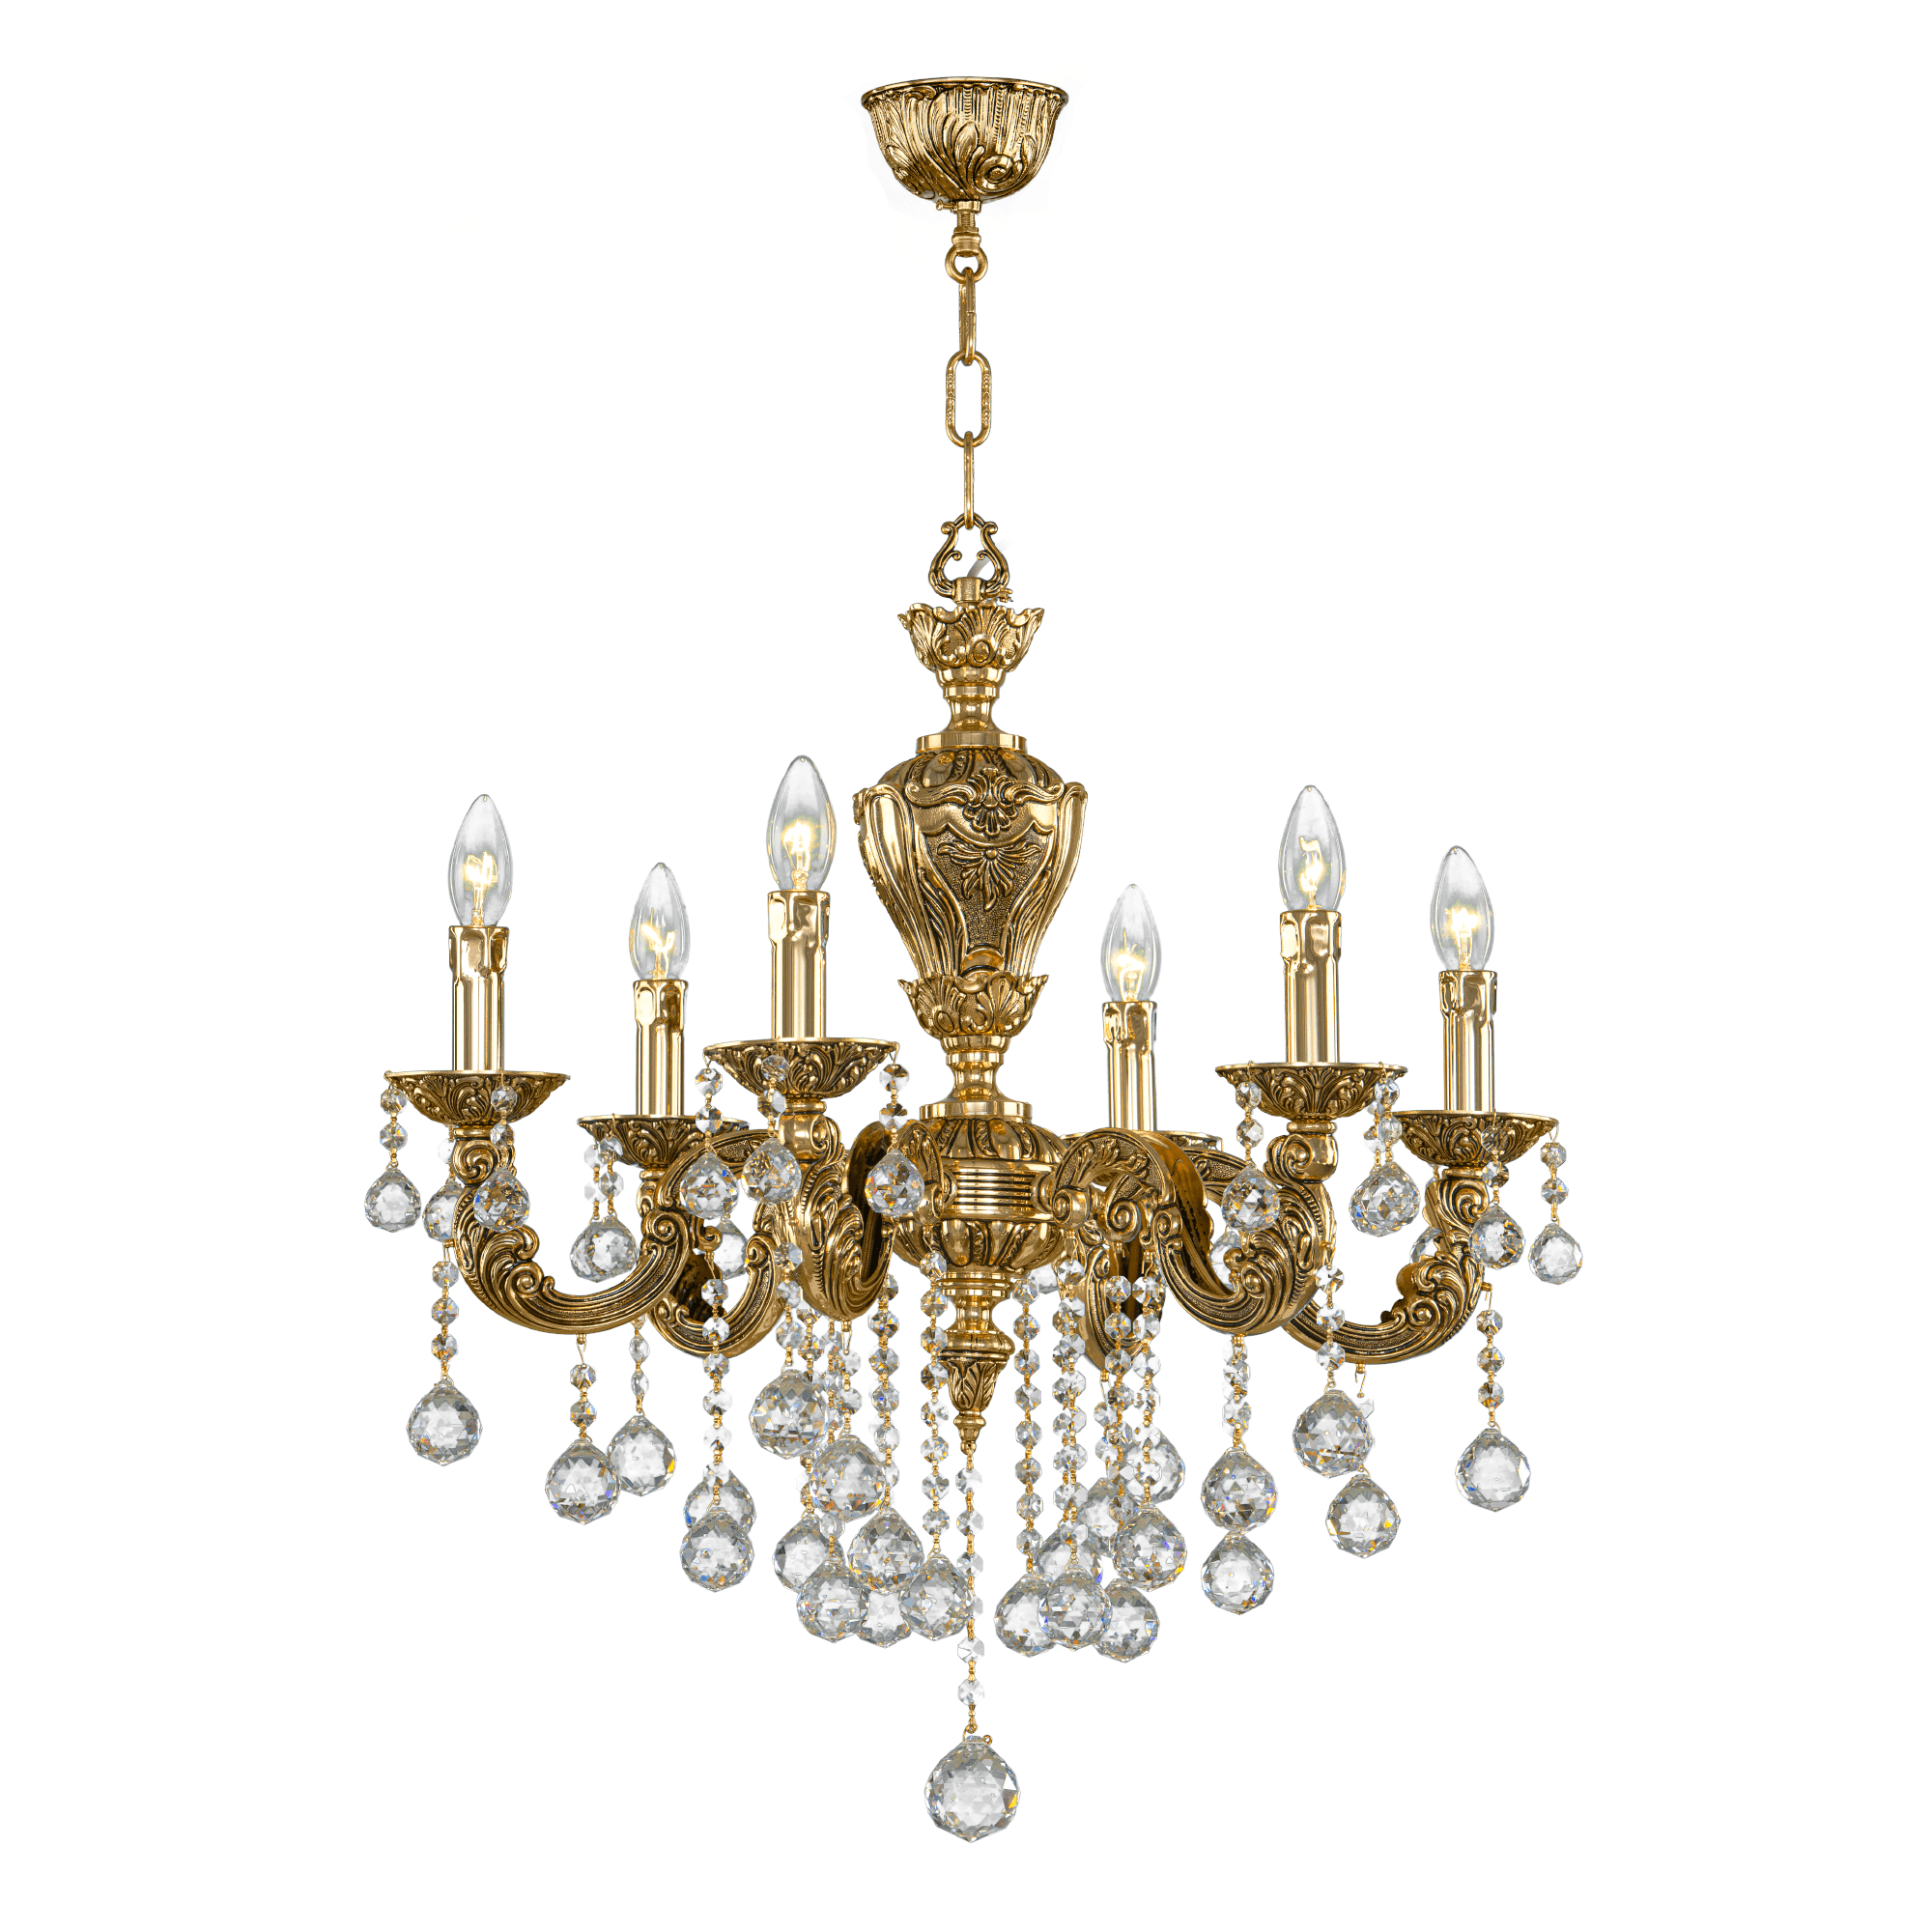 Asfour-Crystal-Lighting-Brass-Collection-Brass-Chandelier-6-Bulbs-Gold-Ox